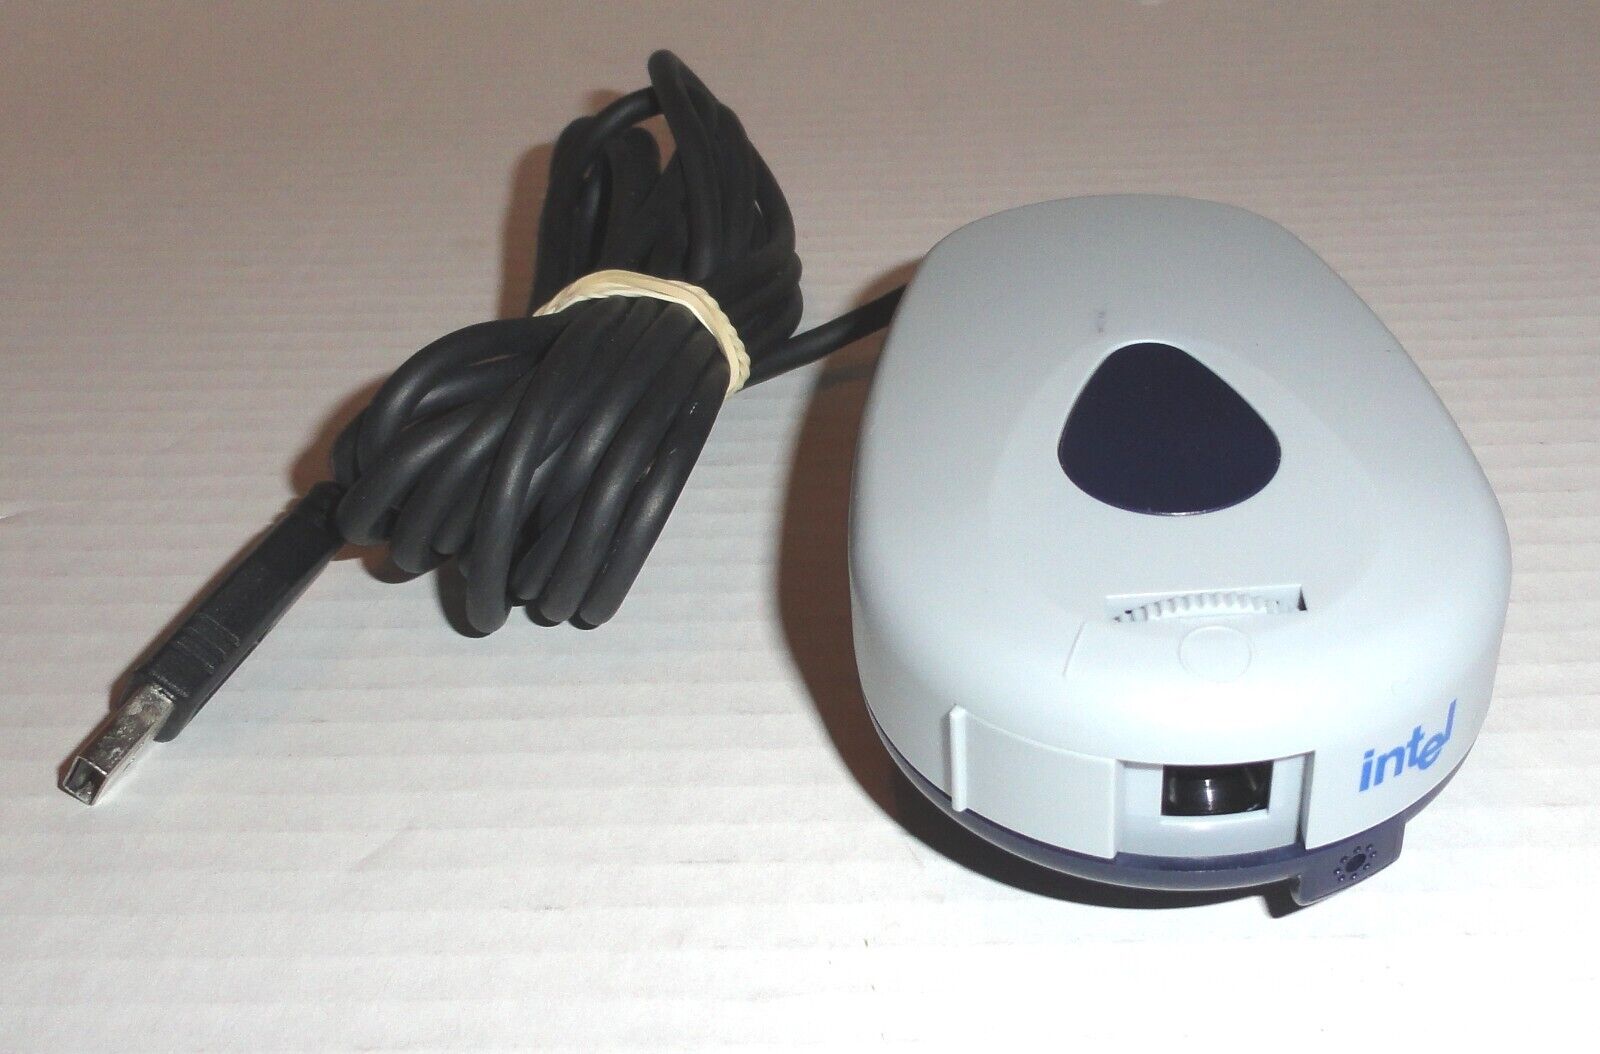 Vintage Intel Pro PC CS431 USB Webcam with Built-In Microphone for Windows 98/ME